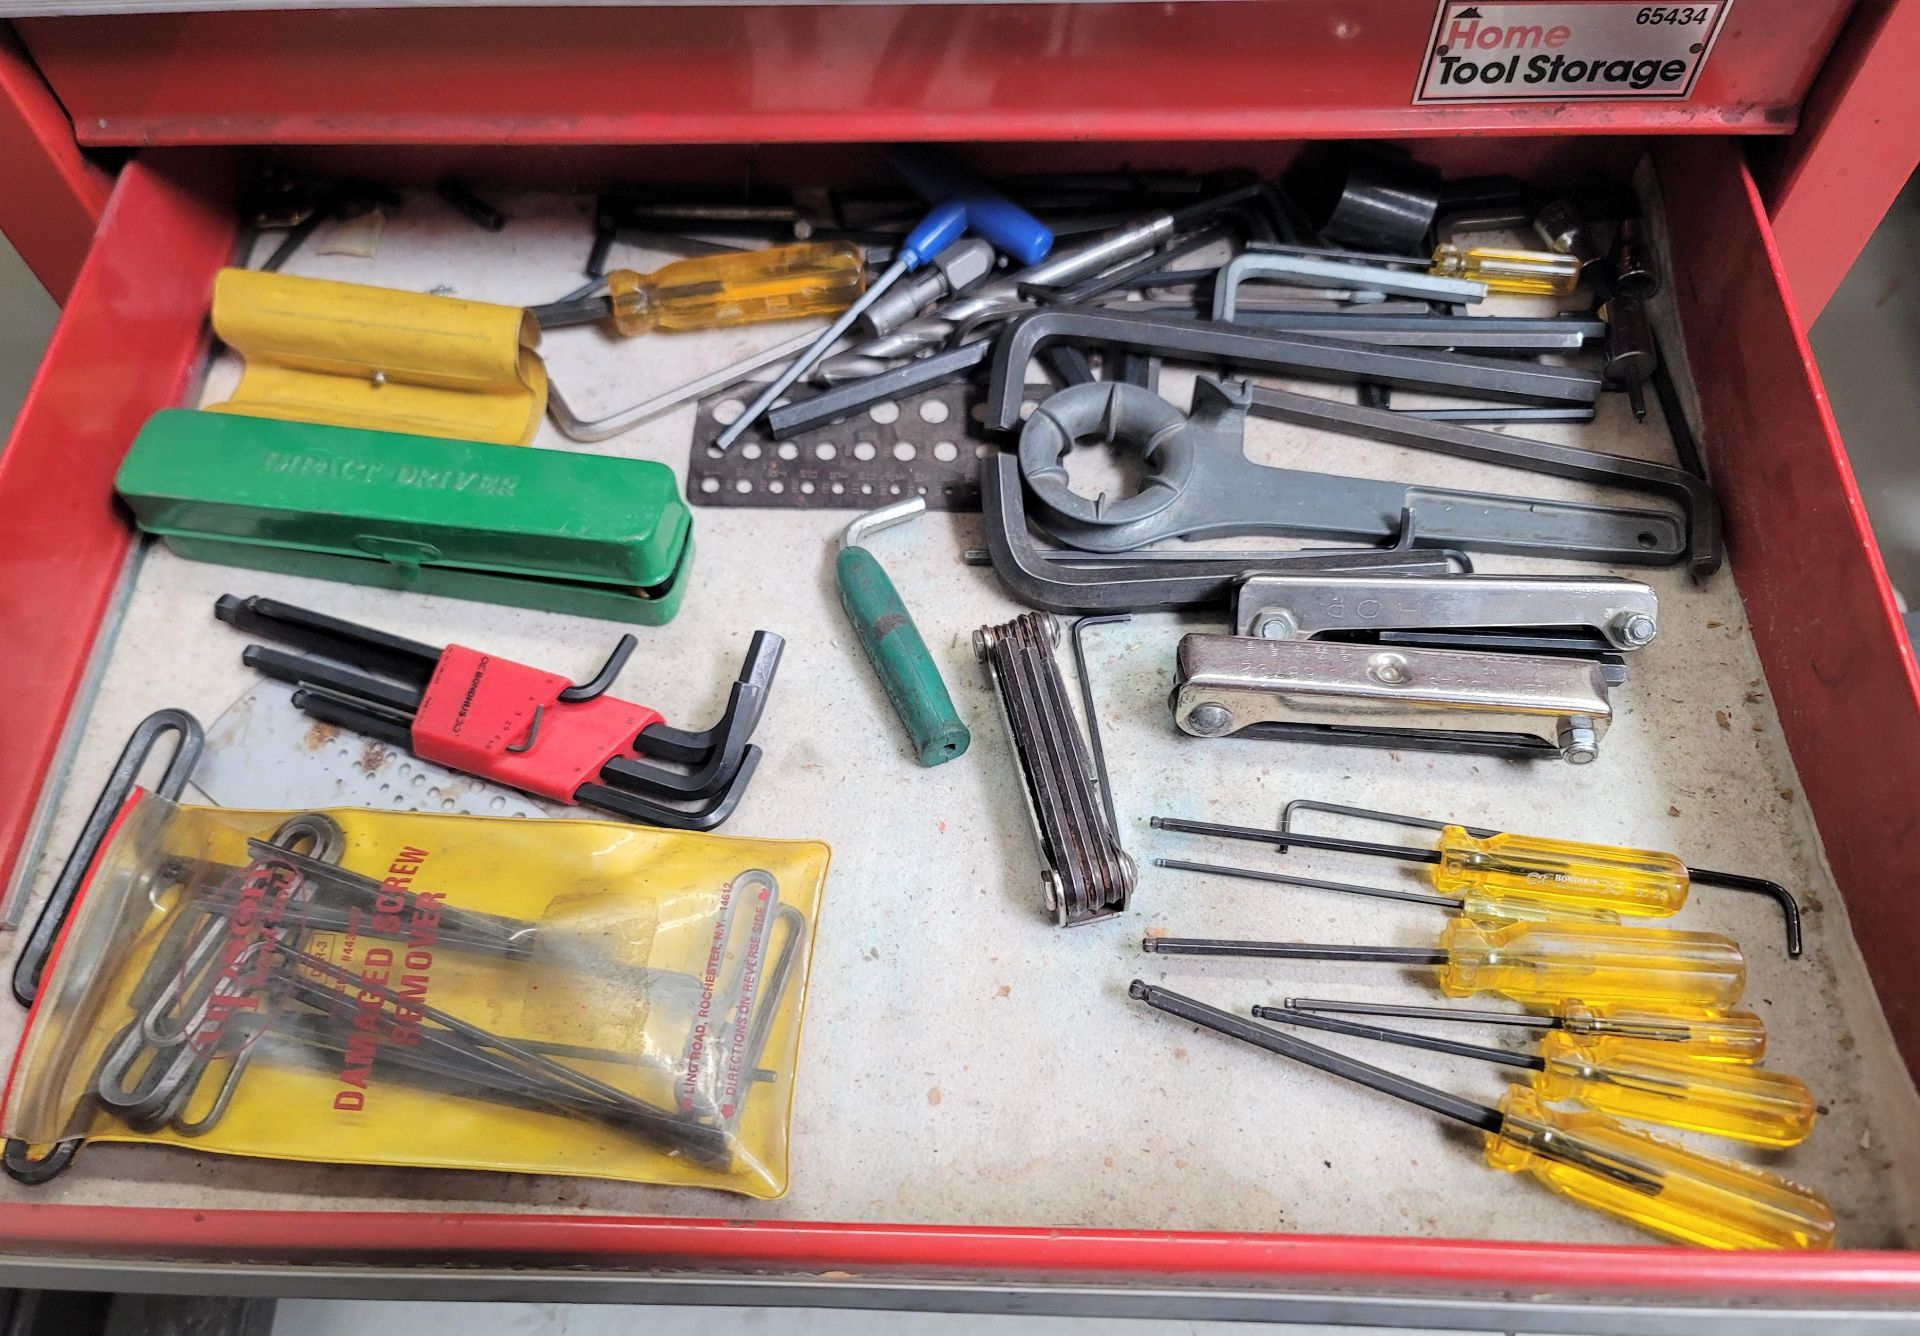 CRAFTSMAN 65434 BOTTOM TOOL BOX, W/ CONTENTS OF ASSORTED HAND TOOLS - Image 3 of 6